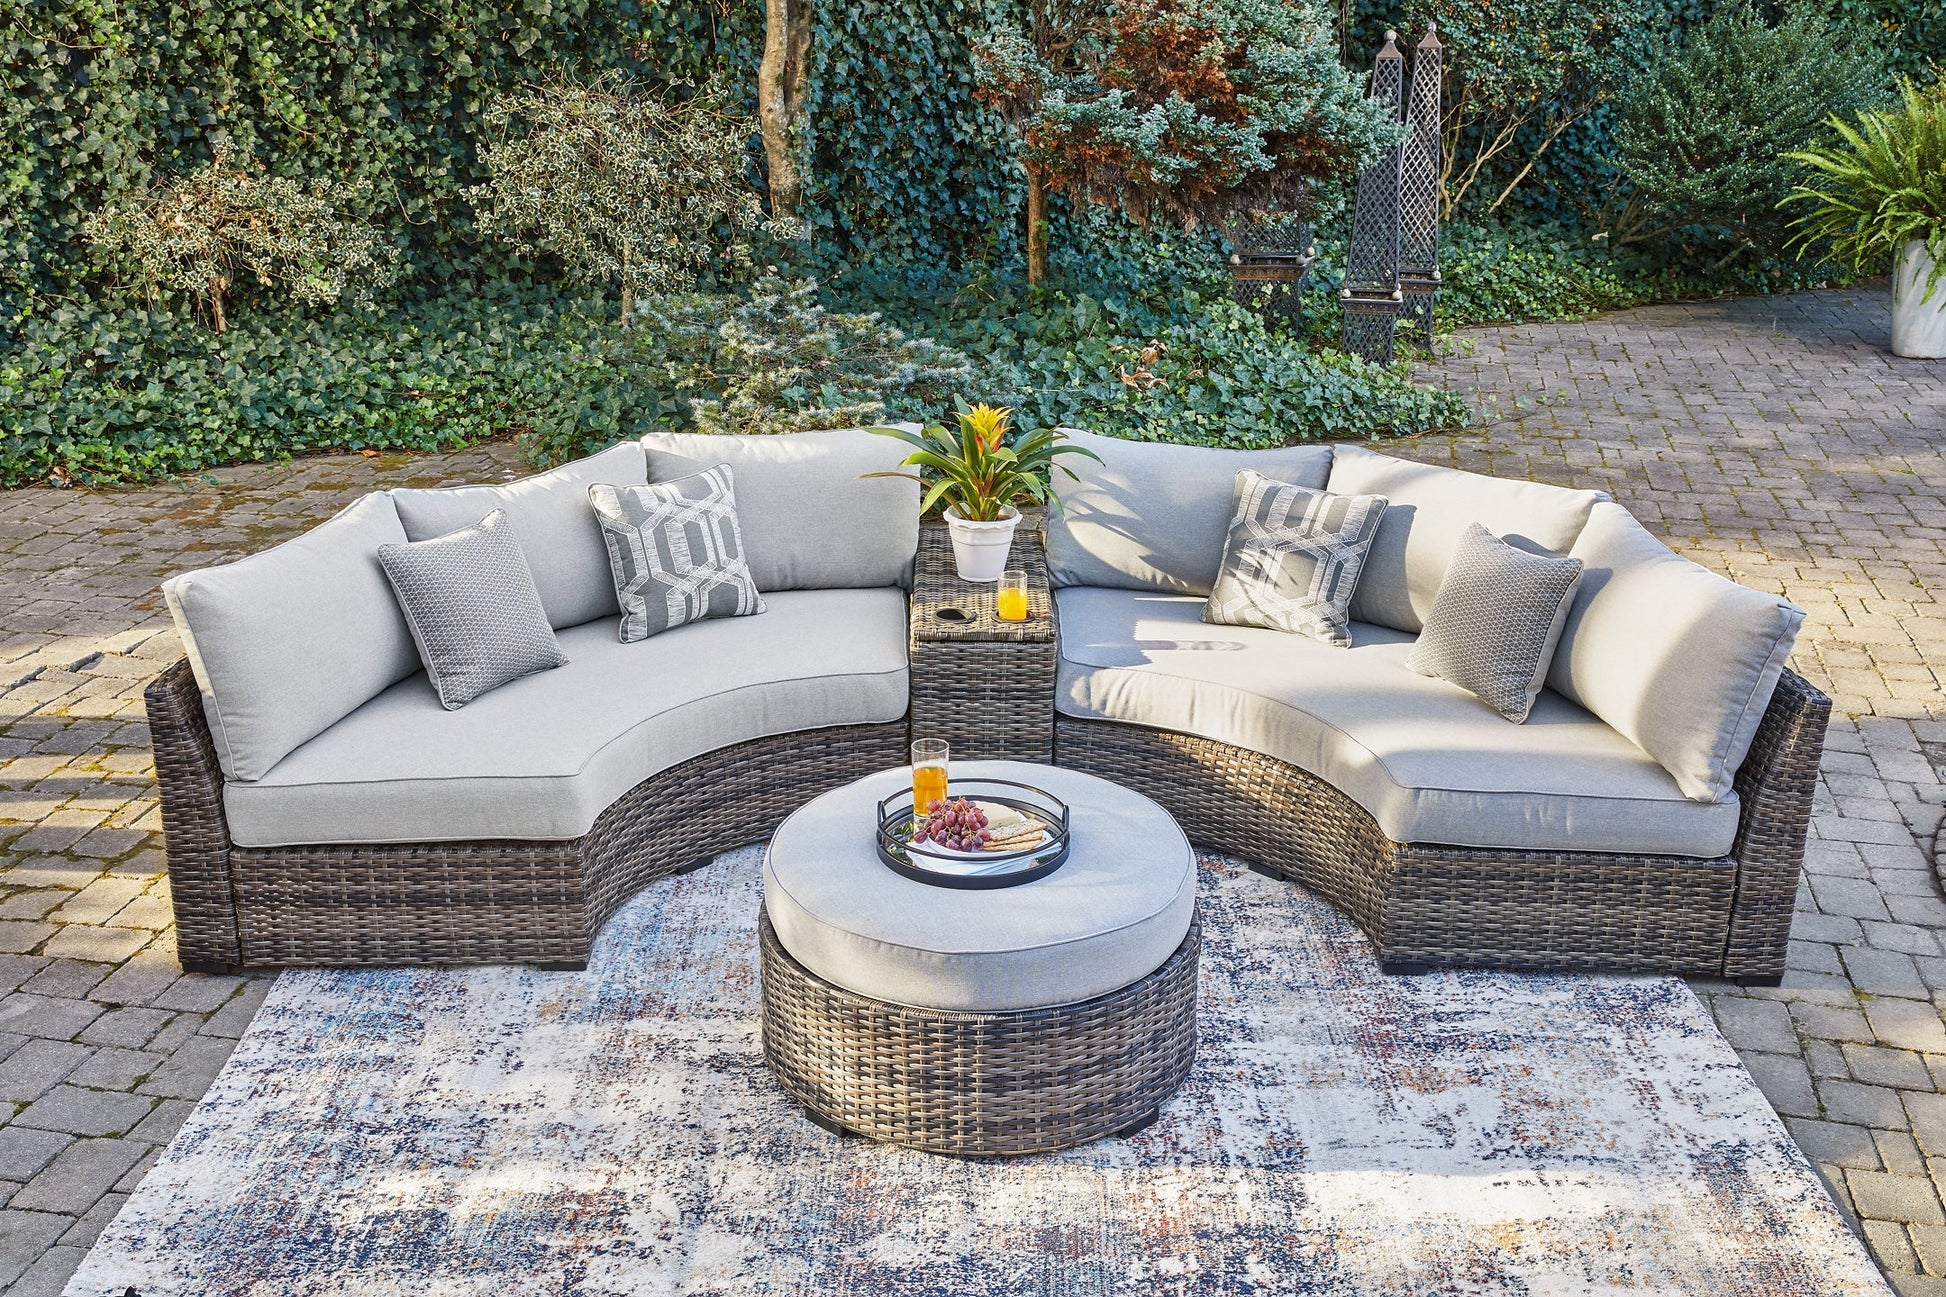 Harbor Court 3-Piece Outdoor Sectional with Ottoman Rent Wise Rent To Own Jacksonville, Florida